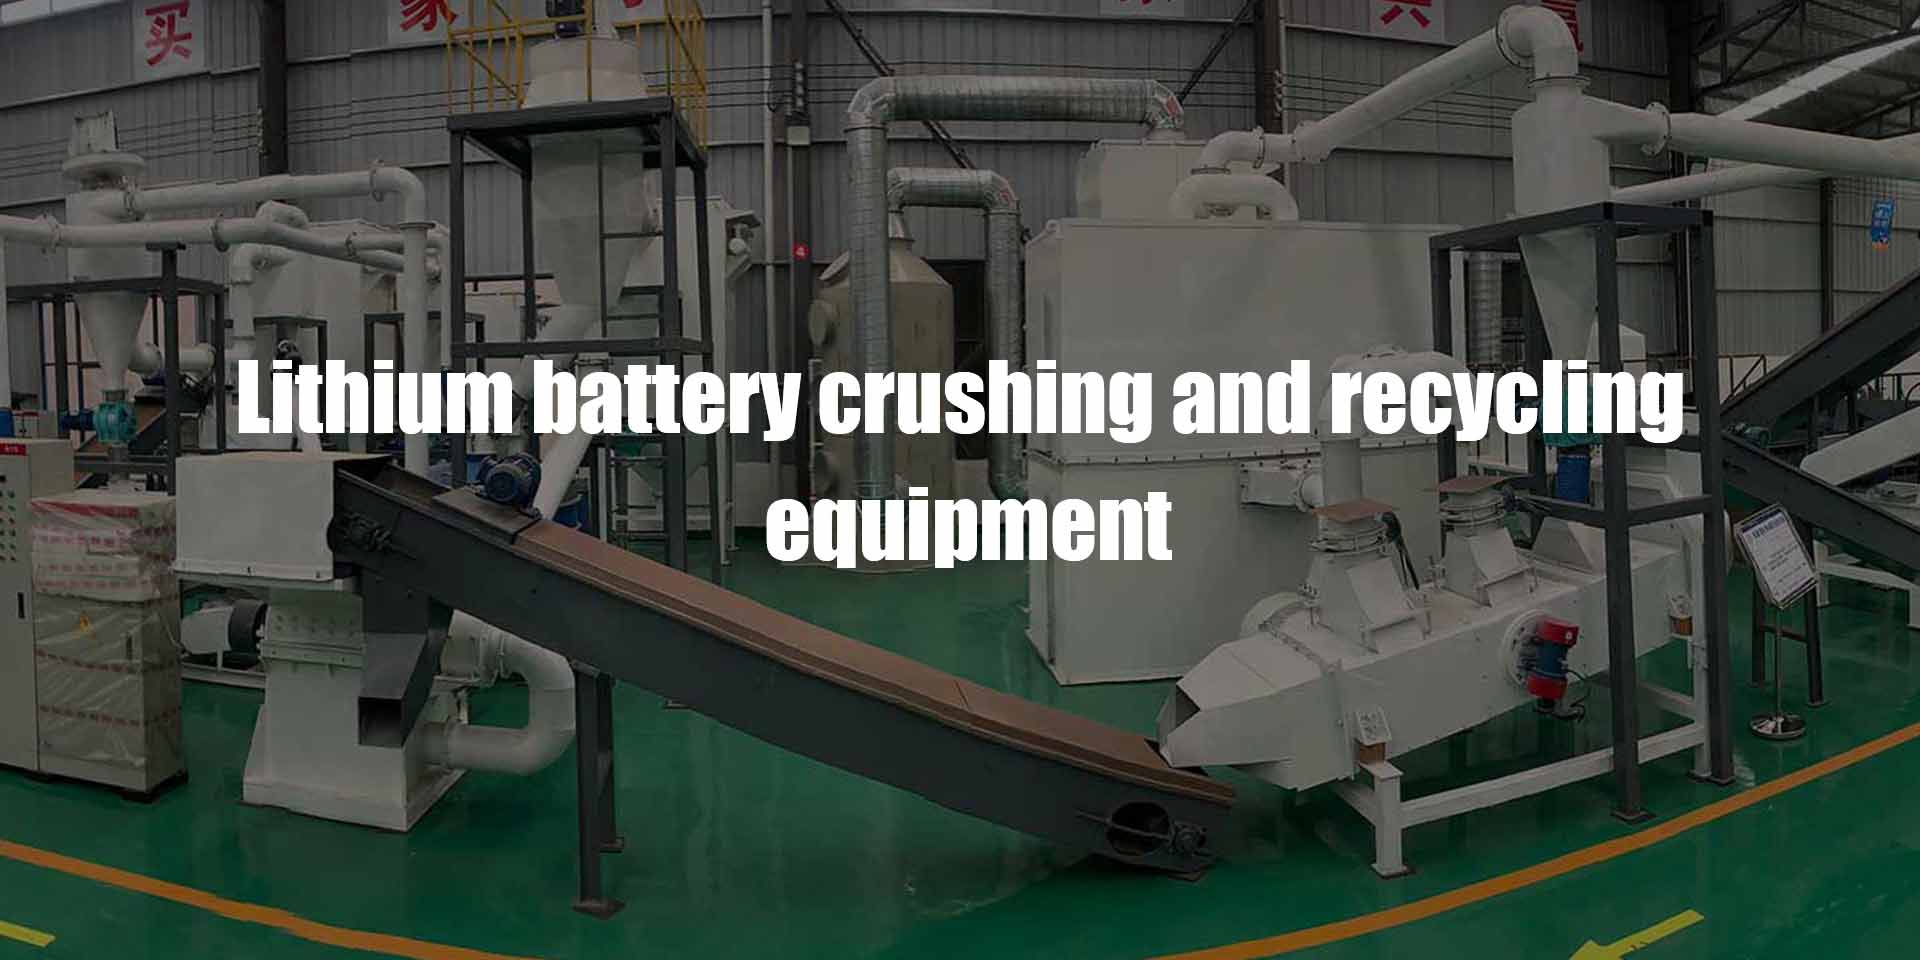 Lithium battery recycling equipment production line